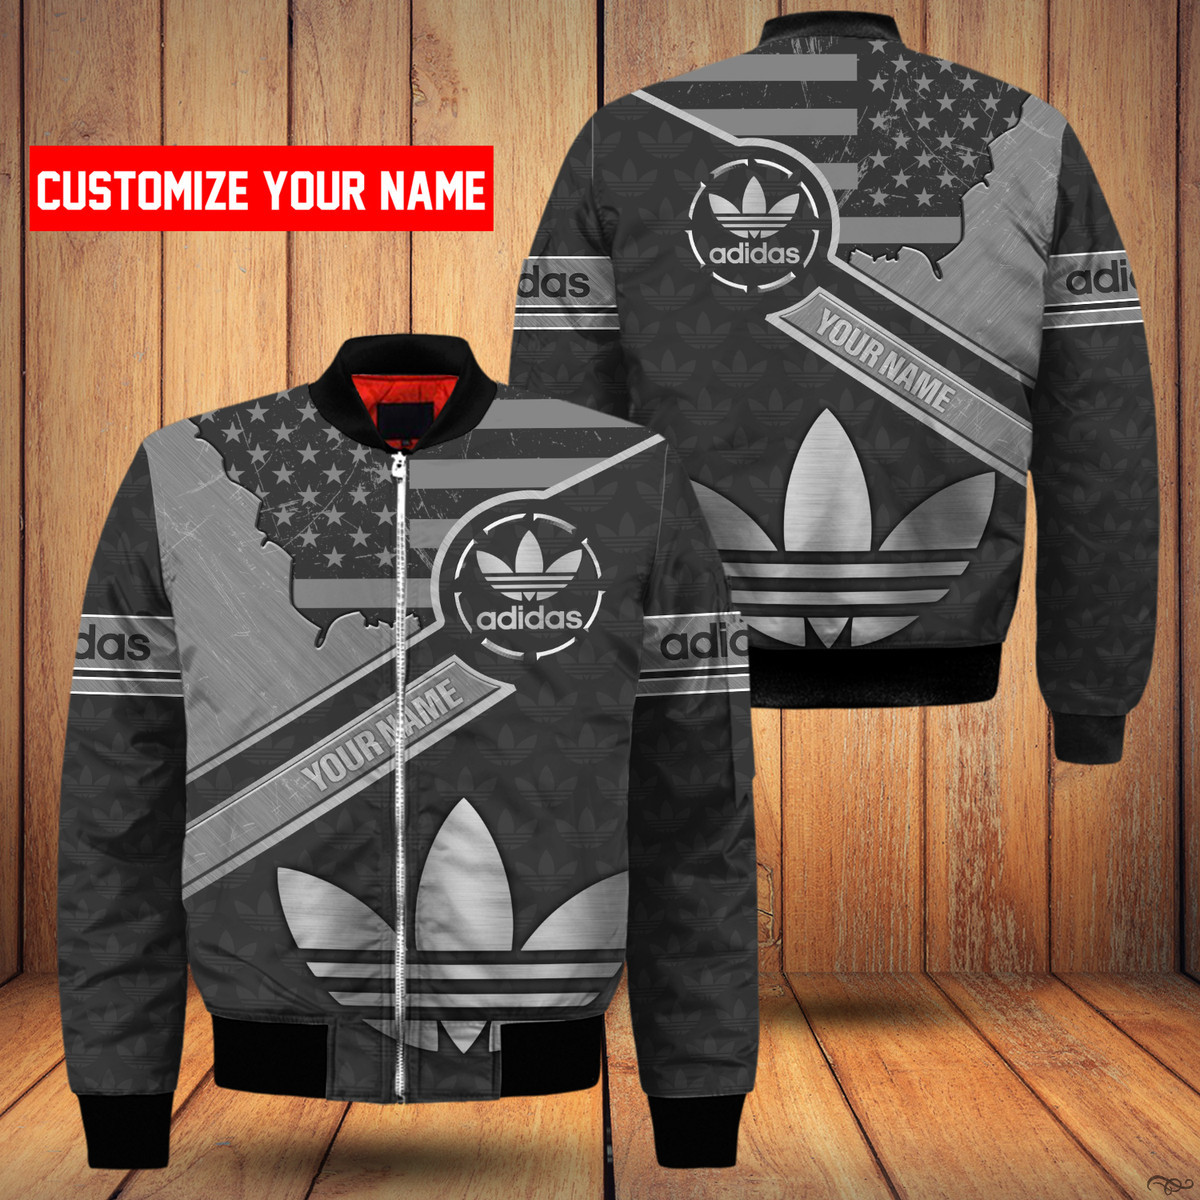 ADD Customize Name Bomber Jacket ADD5351 Ver 11 Bomber